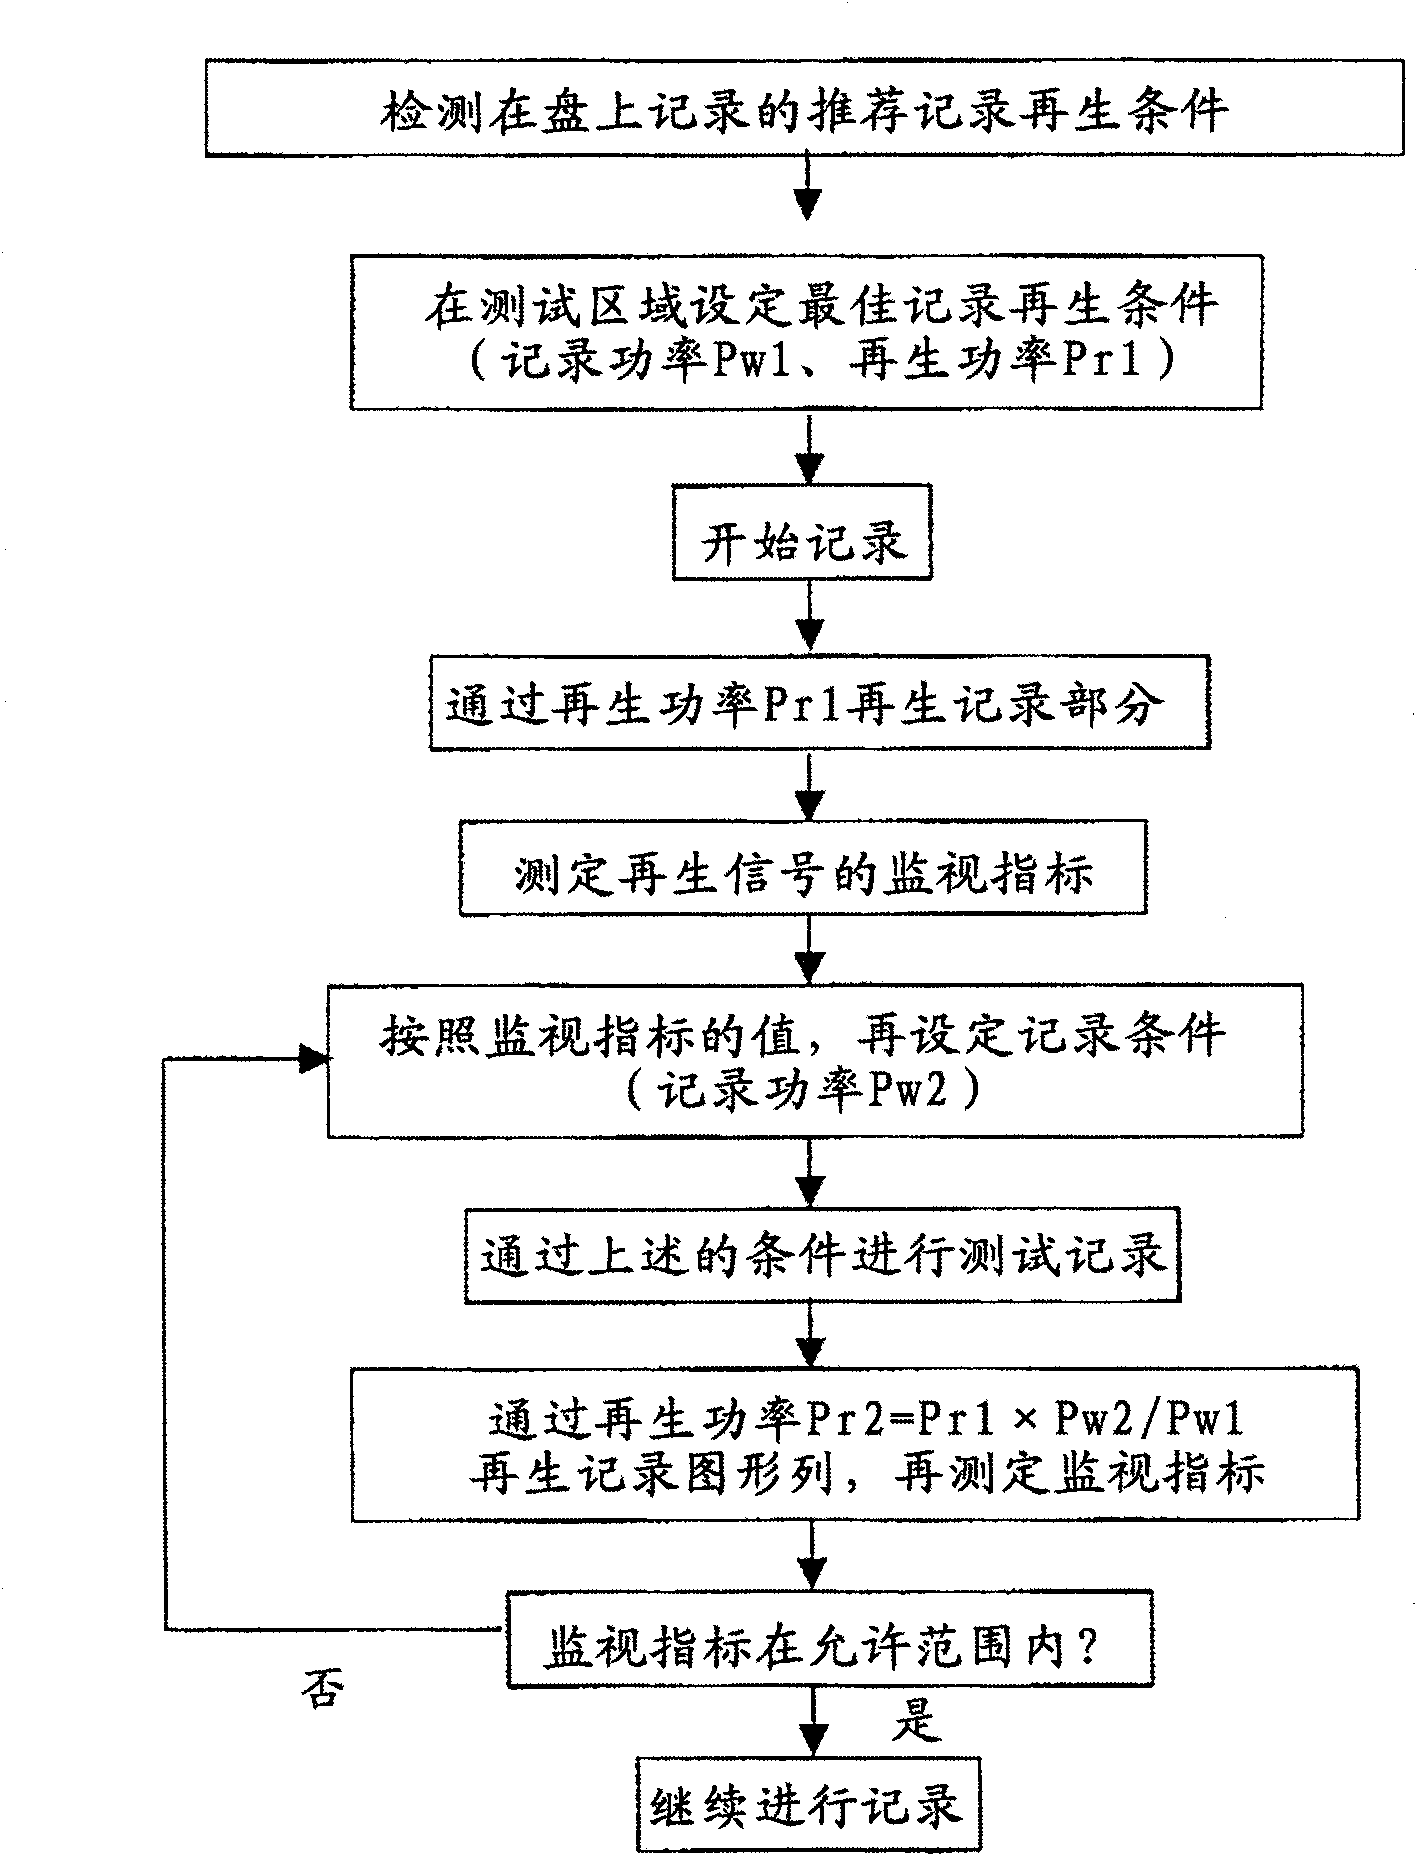 Method and apparatus for recording and reproducing optical information, and recording medium